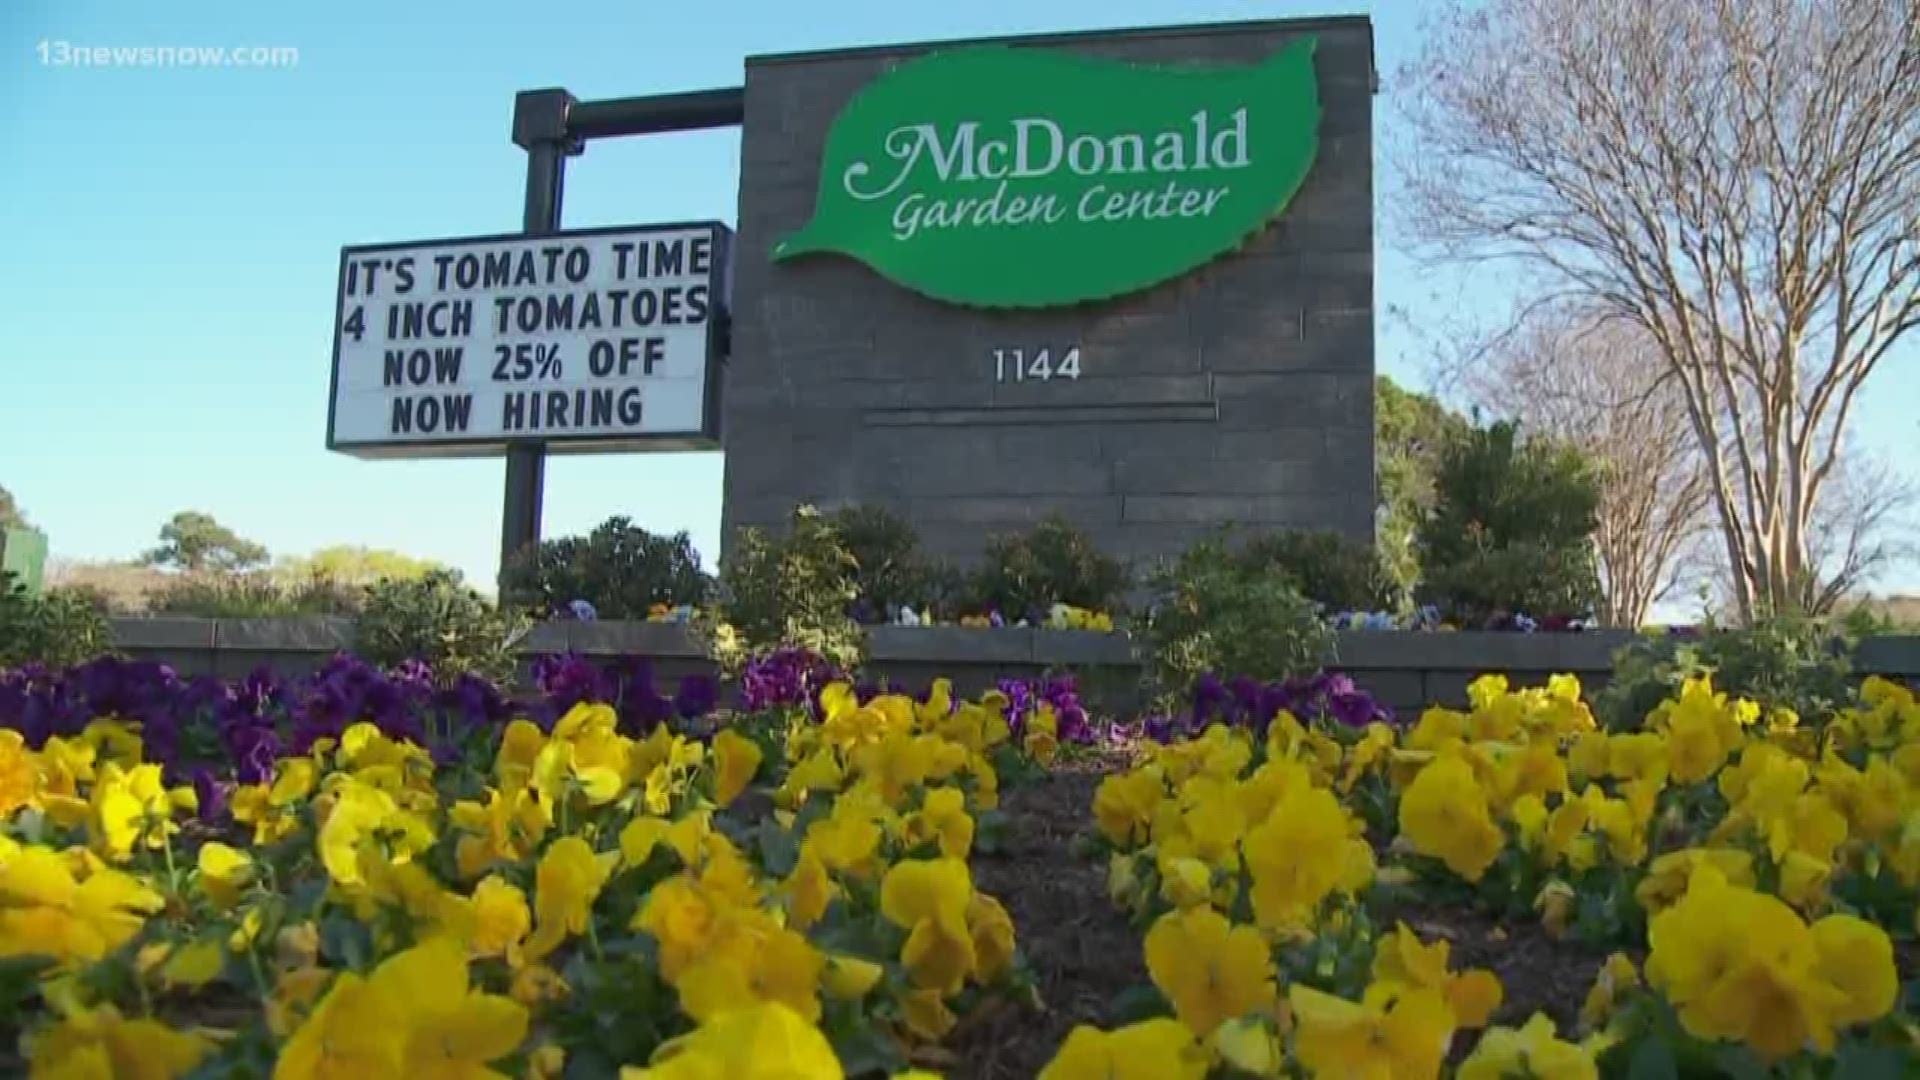 People are staying home to slow the spread of coronavirus, which gives them time to start a garden this spring. McDonald Garden Center started delivering plants.